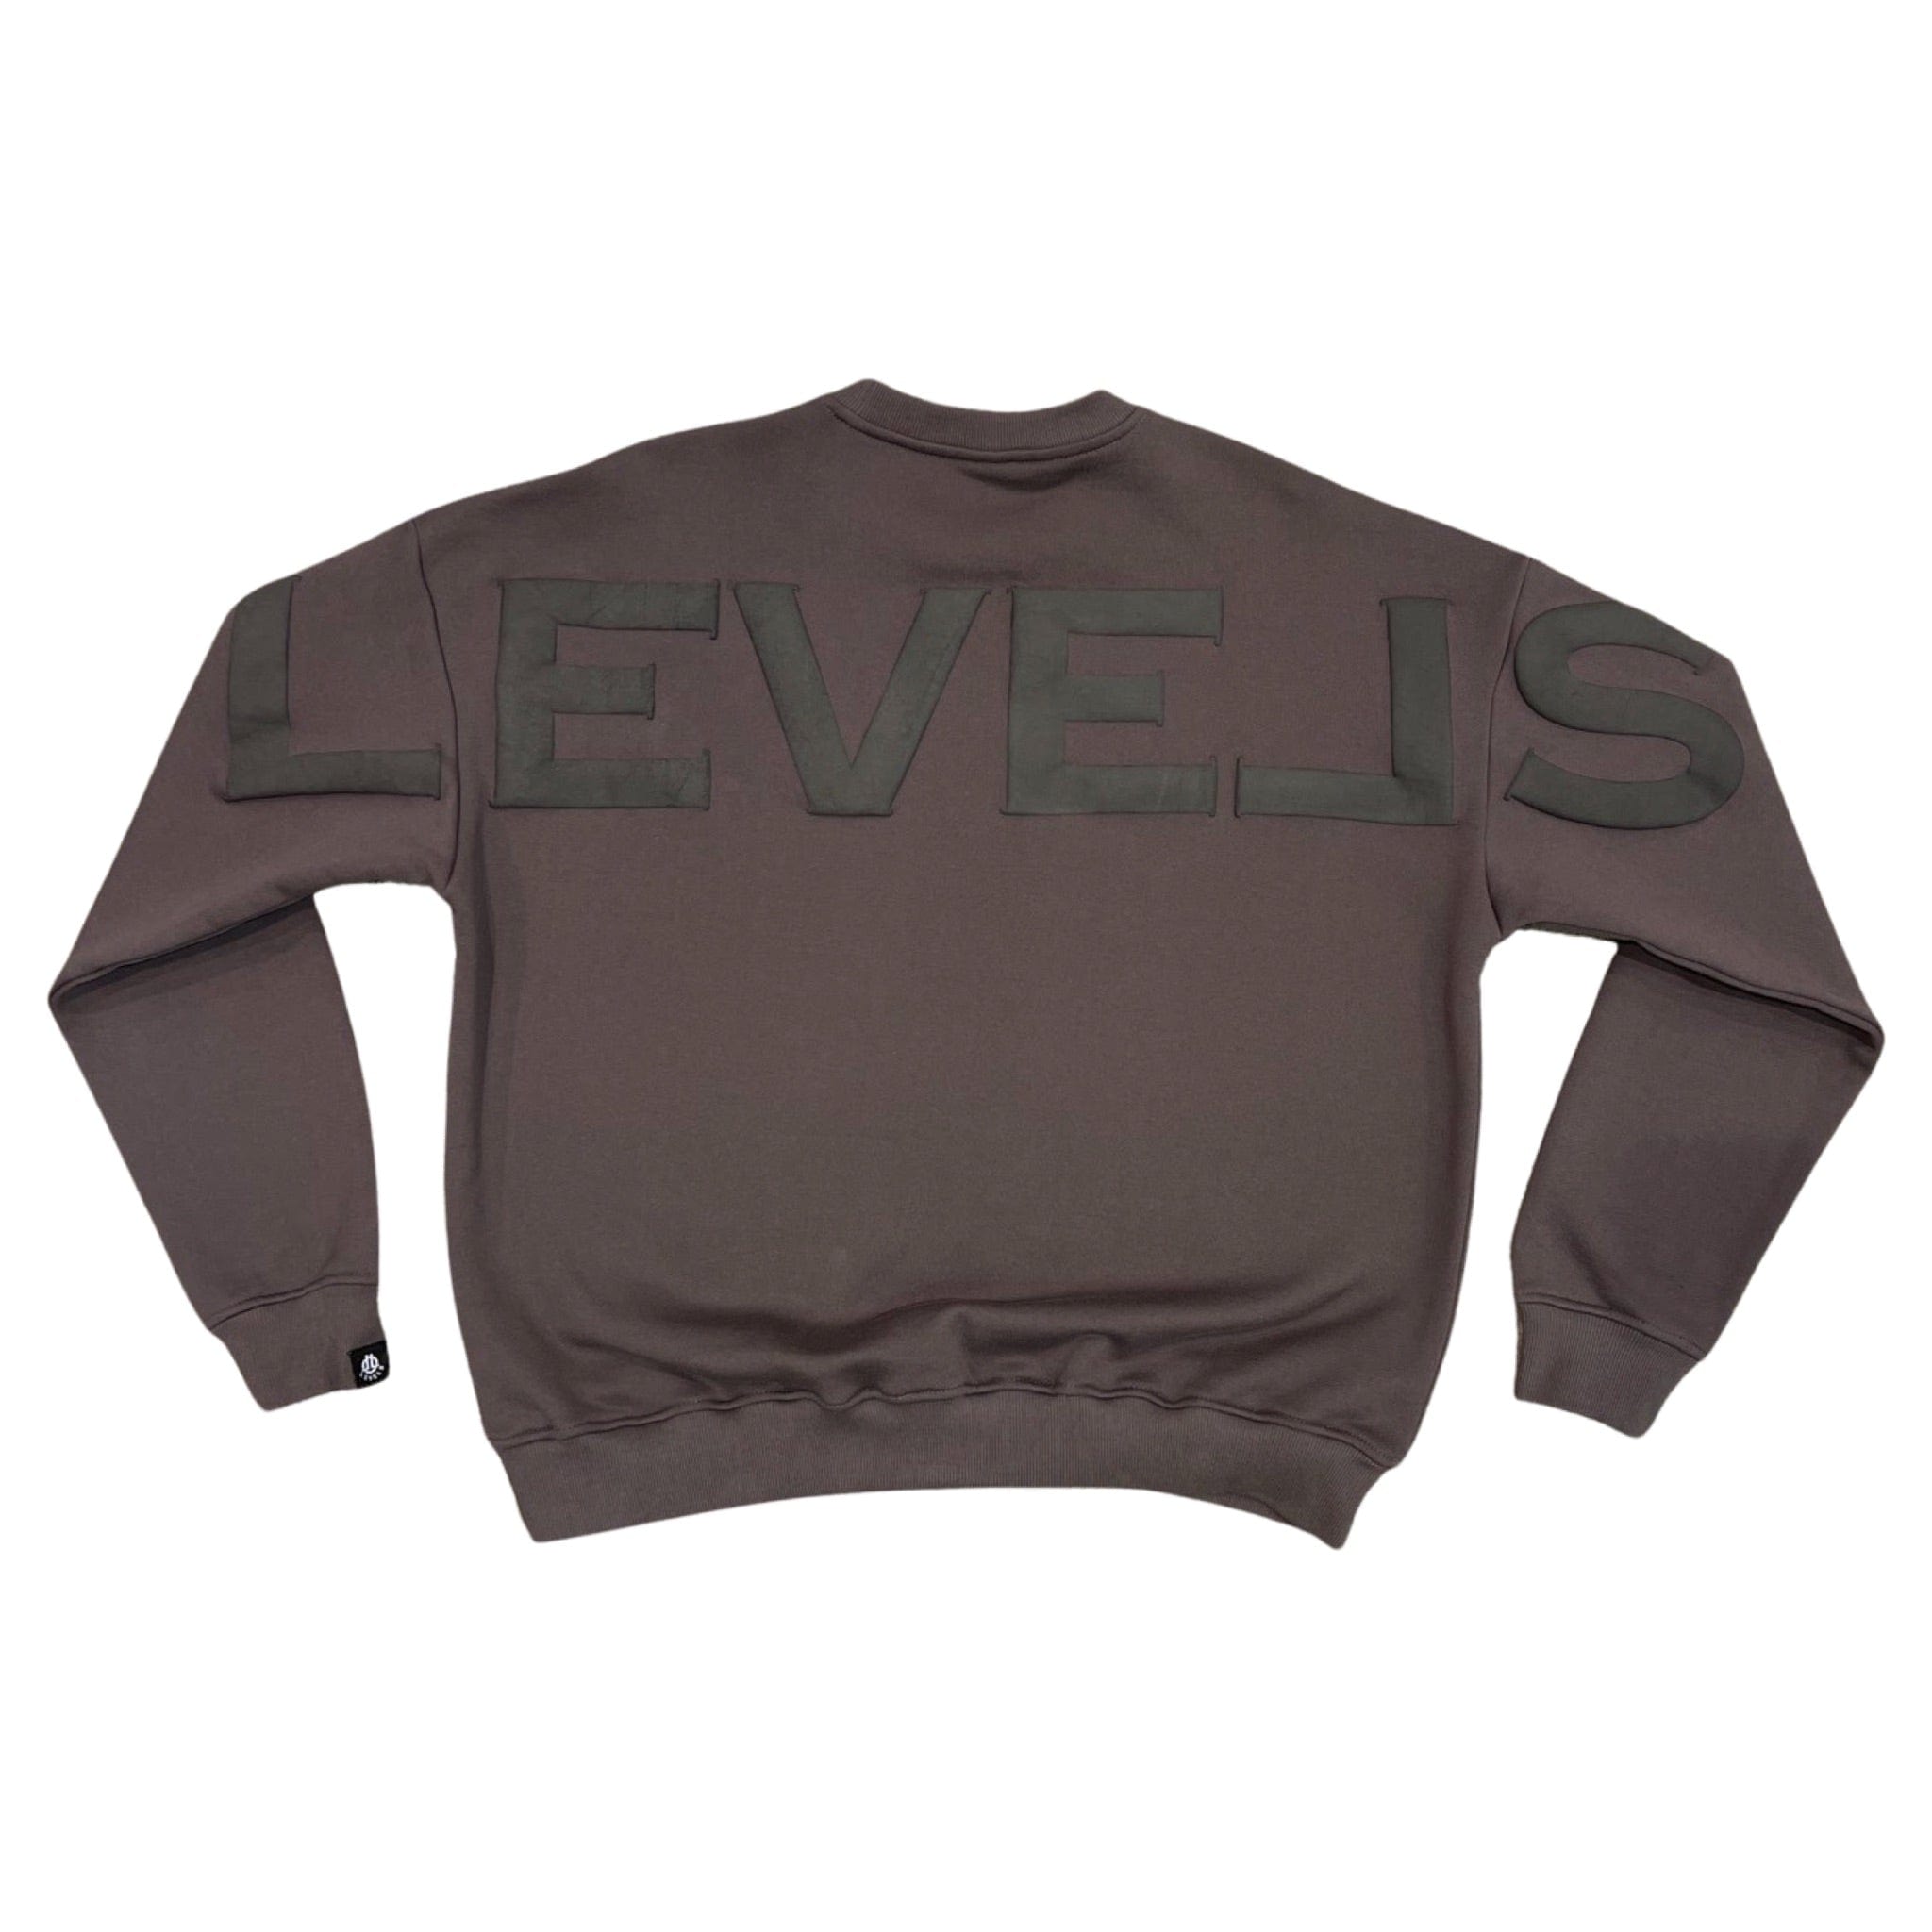 LEVELS, LLC Apparel & Accessories LEVELS OVERSIZED CREWNECK (BLINKOW EDITION)